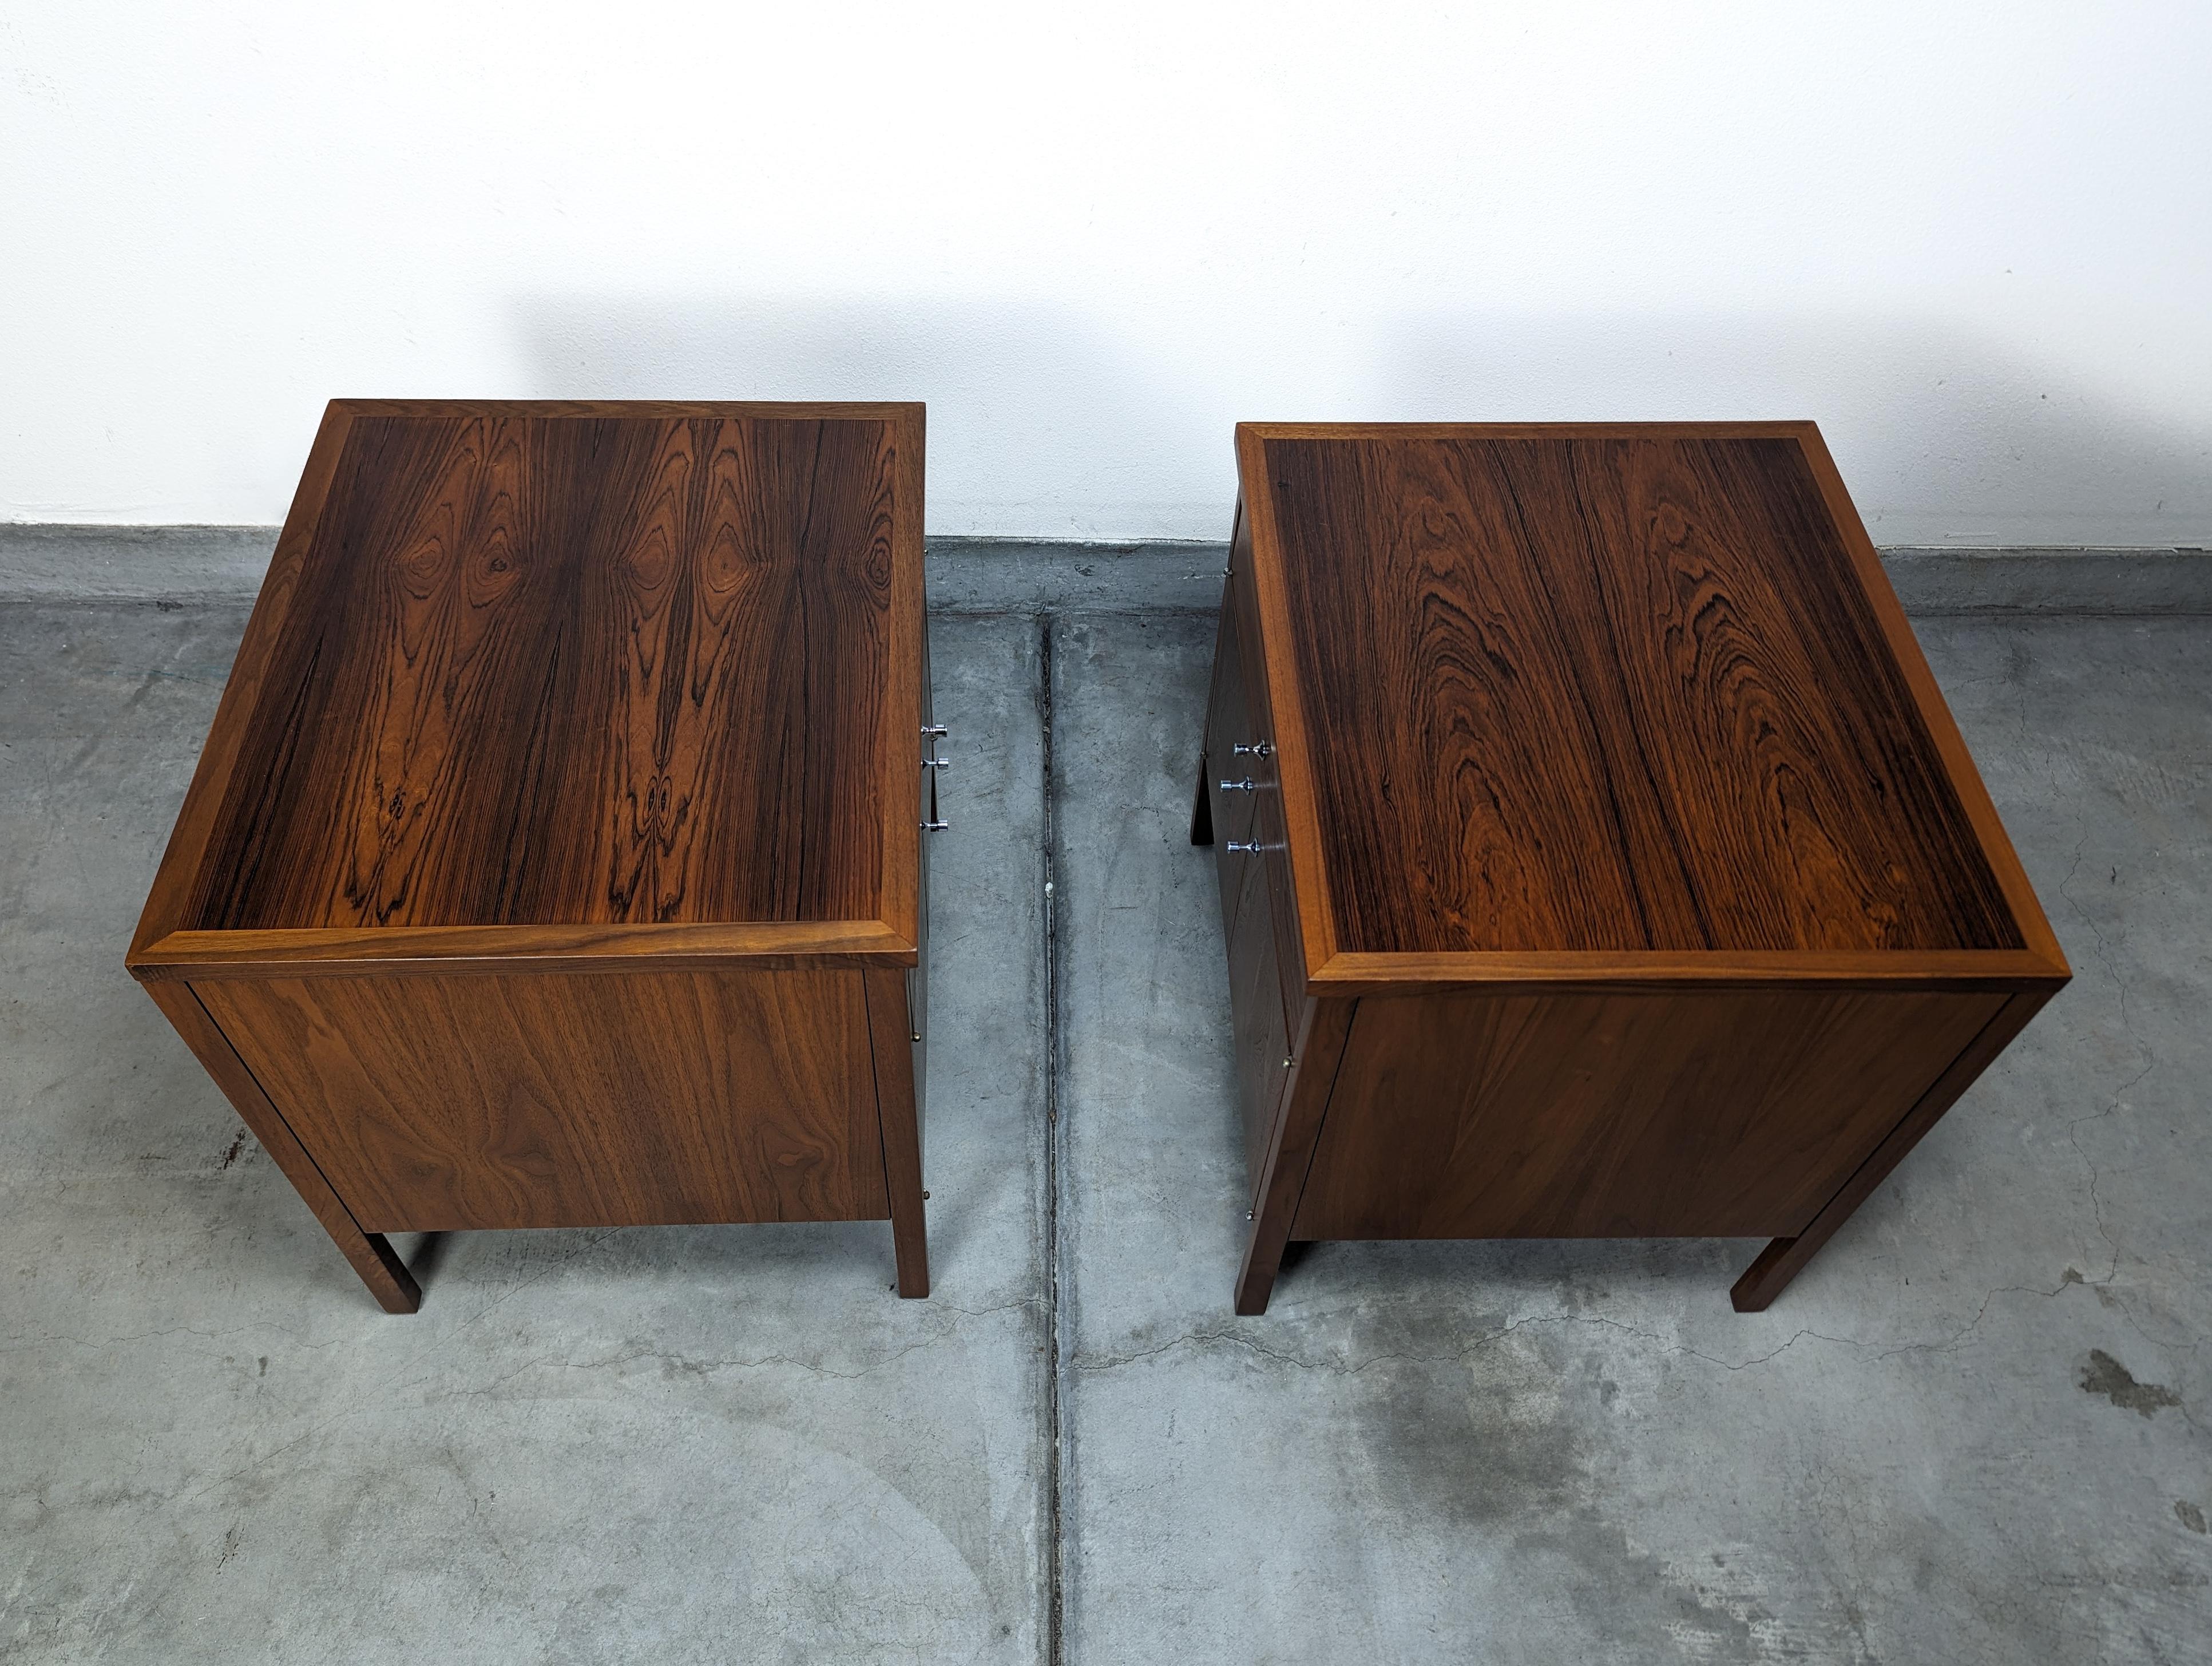 Pair of Mid Century Modern Delineator Nightstands by Paul McCobb for Lane, c1960 For Sale 6